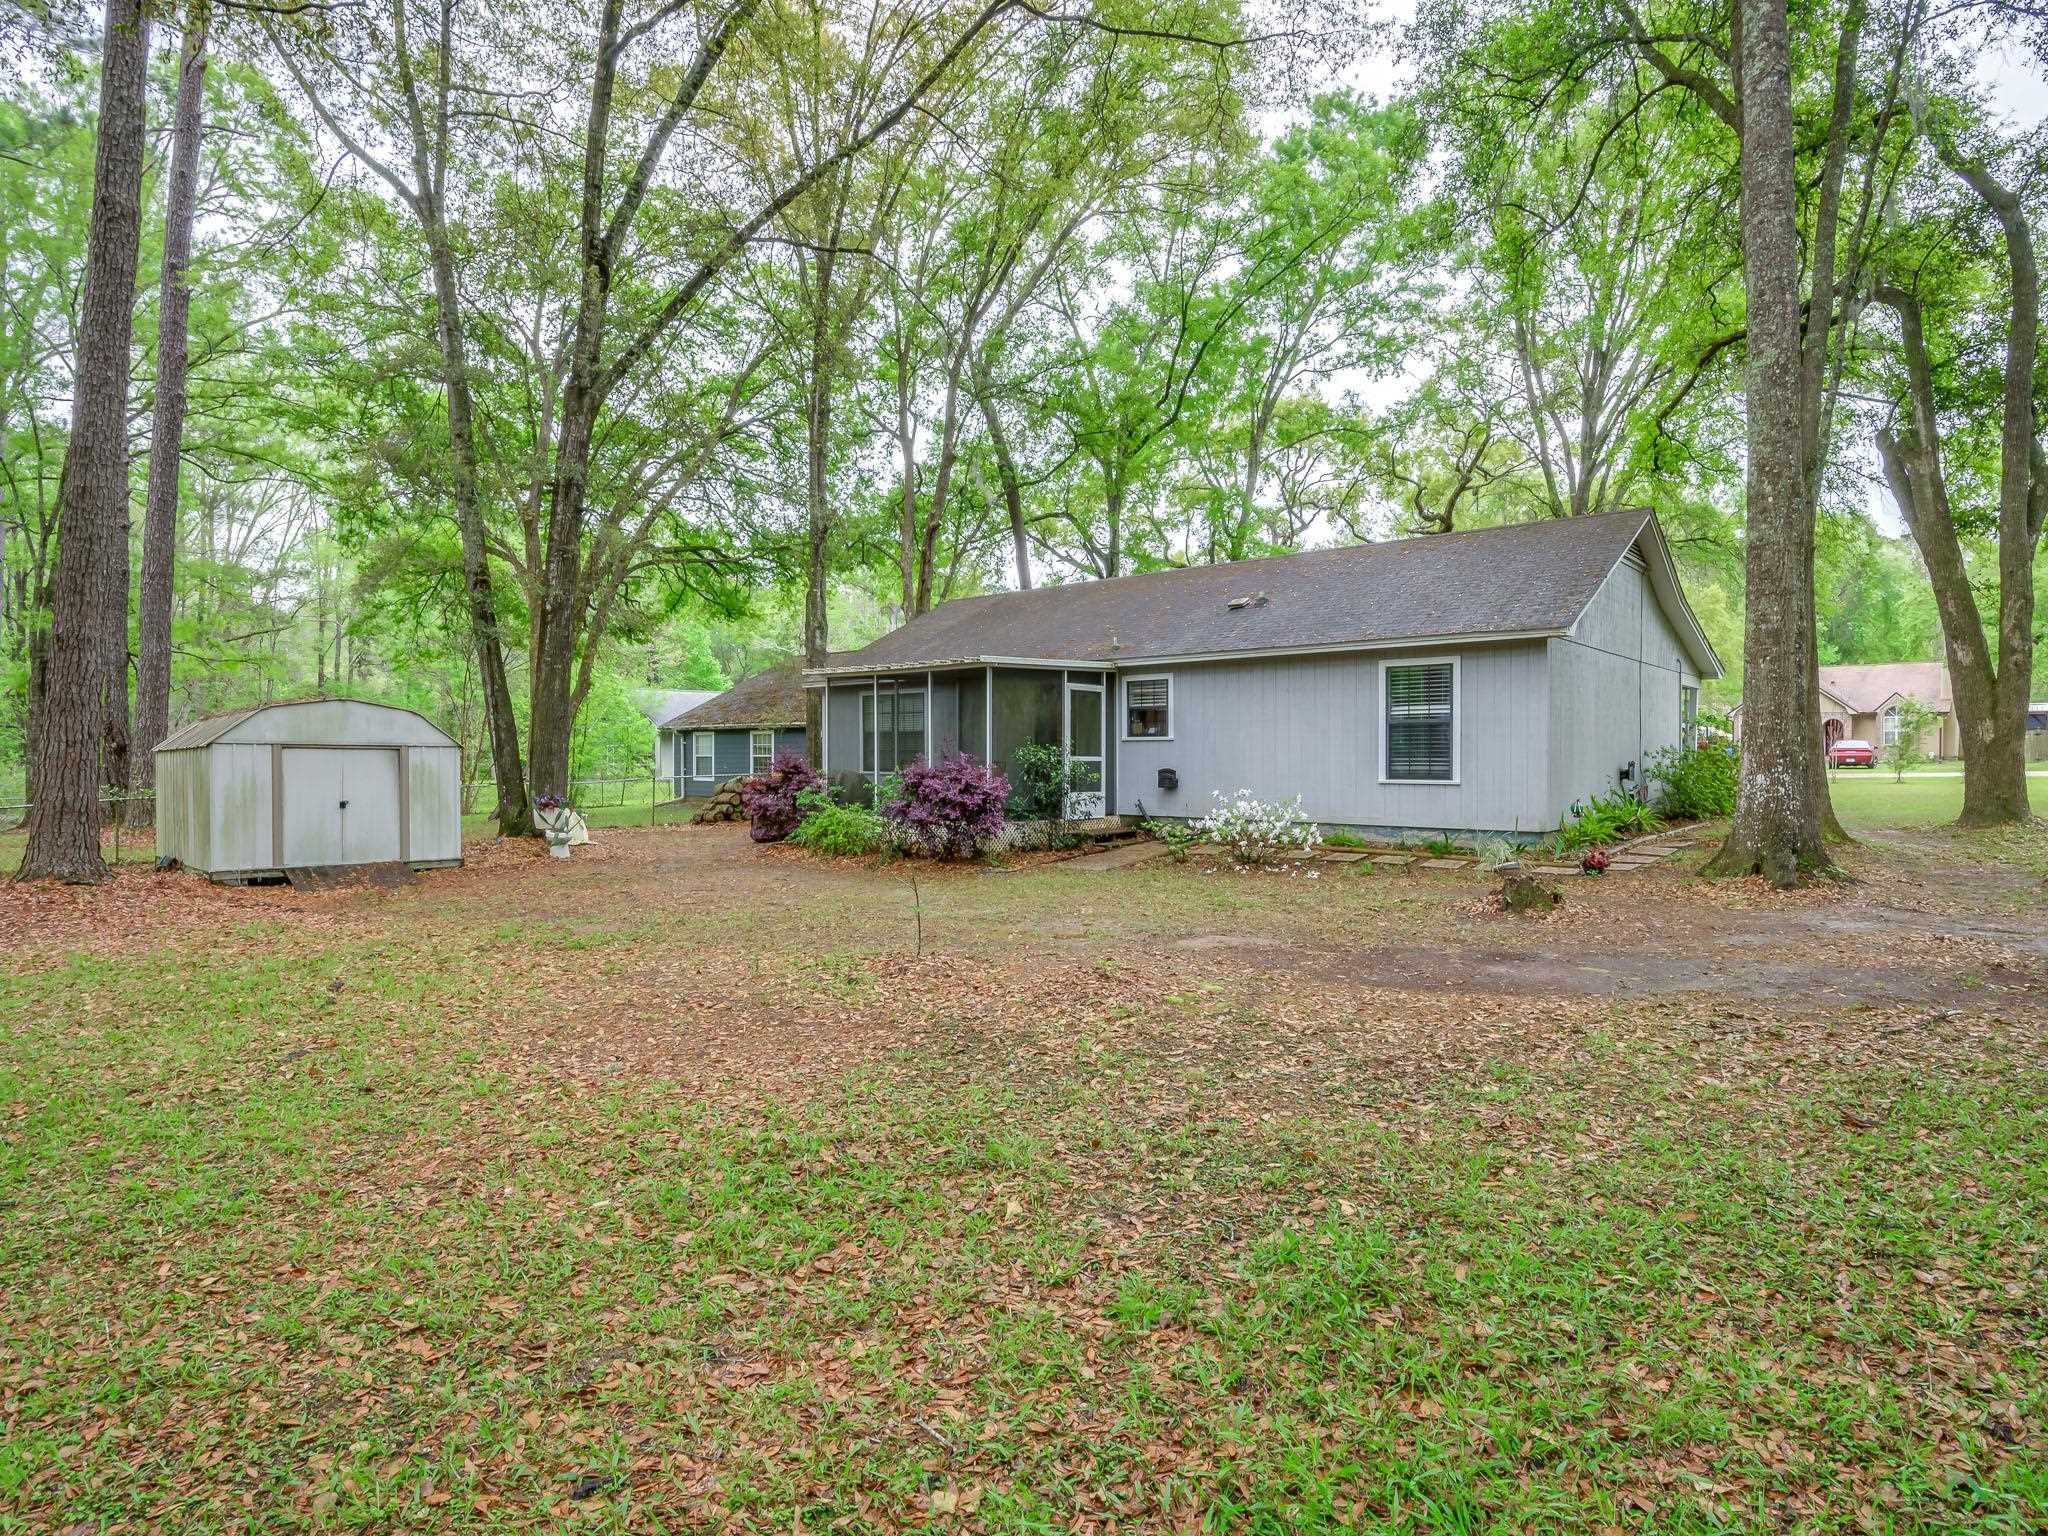 8200 Little Terry Circle,TALLAHASSEE,Florida 32311,3 Bedrooms Bedrooms,2 BathroomsBathrooms,Detached single family,8200 Little Terry Circle,369861